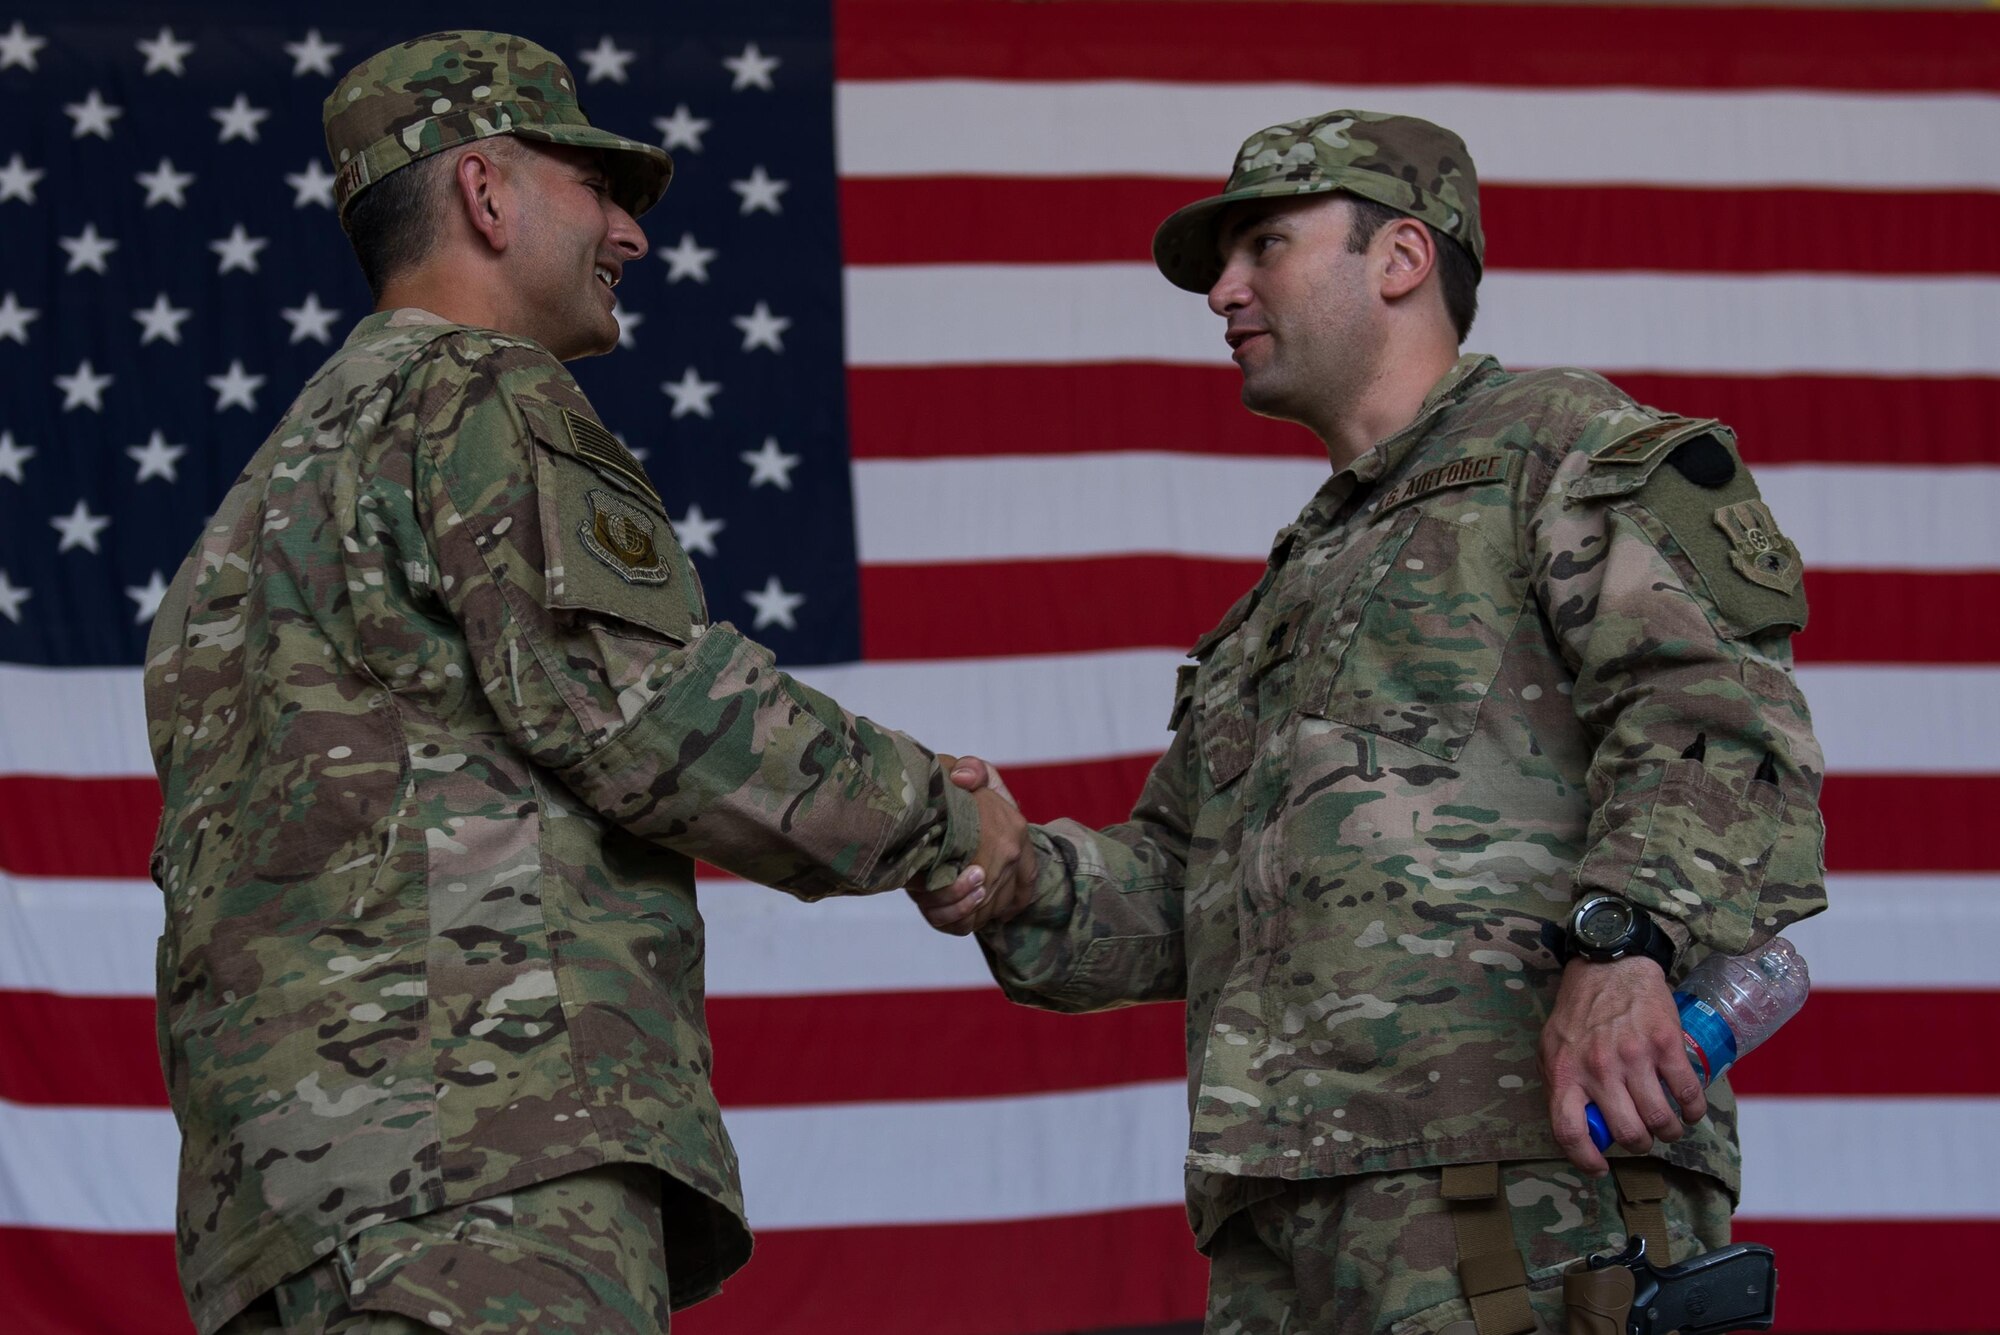 U.S. Air Force Brig. Gen. Dave Julazadeh, 455th Air Expeditionary Wing commander, shakes hands with Lt. Col. Heath Frye, 455th Expeditionary Communications Squadron commander, after the 455th AEW change of command ceremony July 1, 2015, at Bagram Airfield, Afghanistan. During the ceremony Julazadeh took over command of the 455th AEW from Brig. Gen. Mark Kelly.  (U.S. Air Force photo by Tech. Sgt. Joseph Swafford/Released)